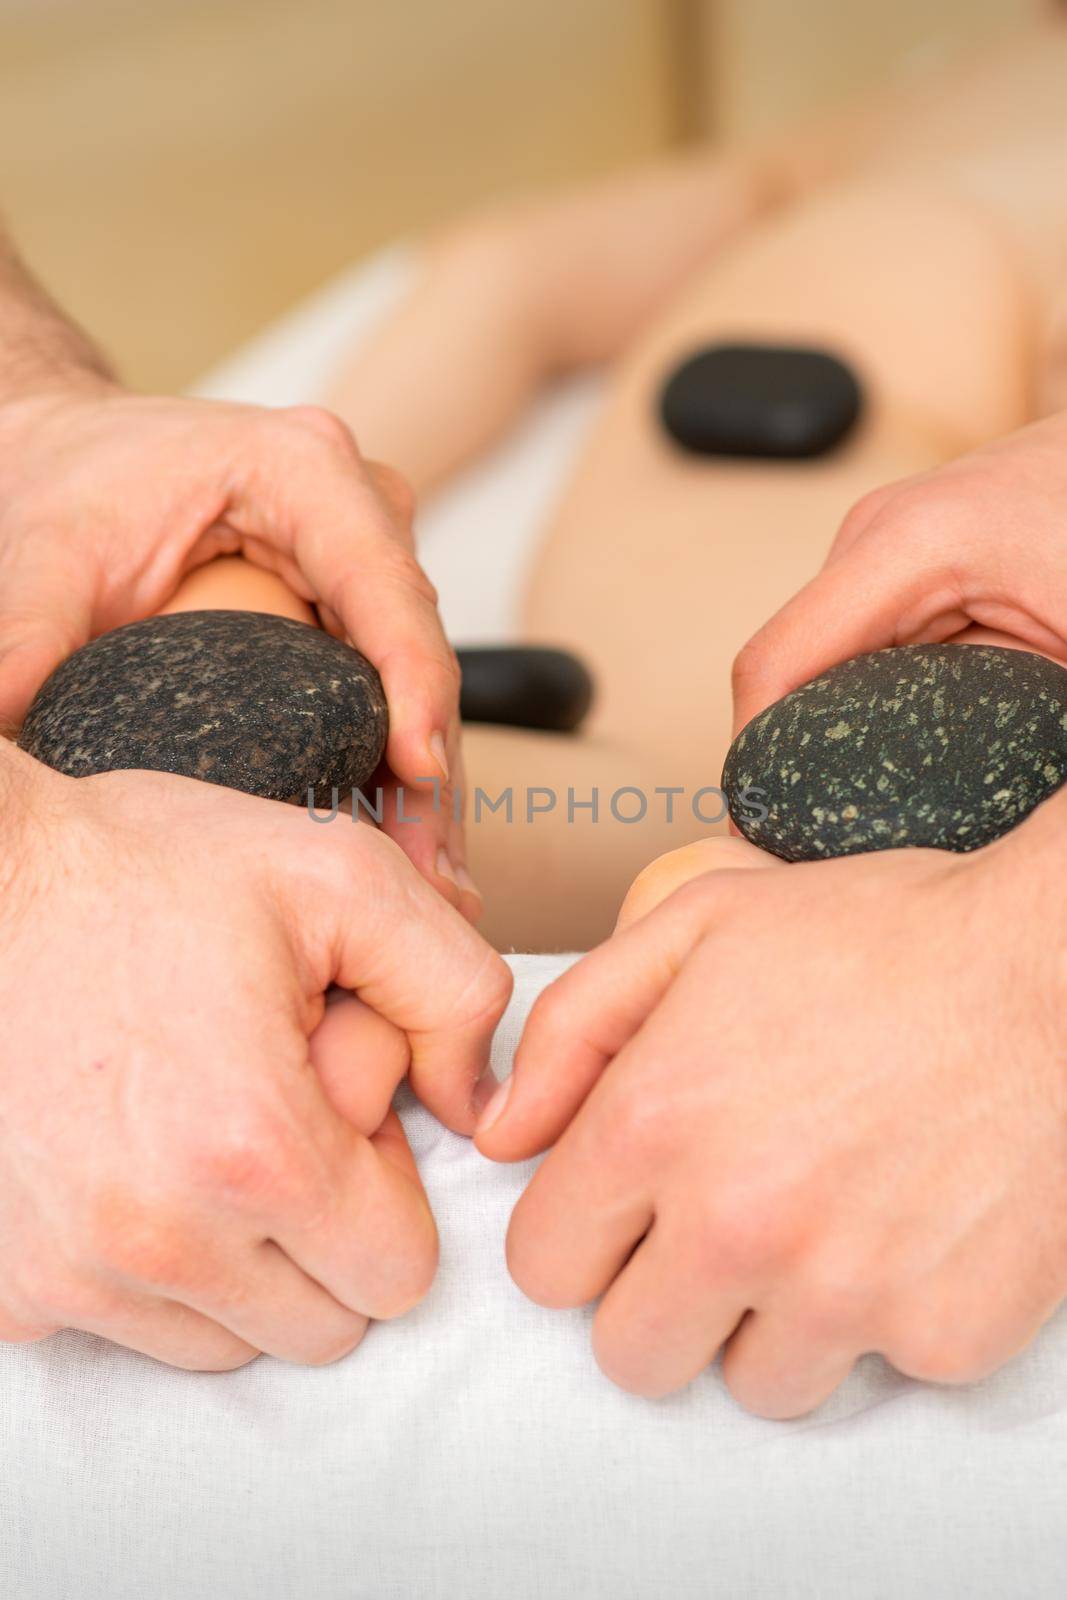 Two masseurs make a foot massage with a hot stone in four hands at the spa